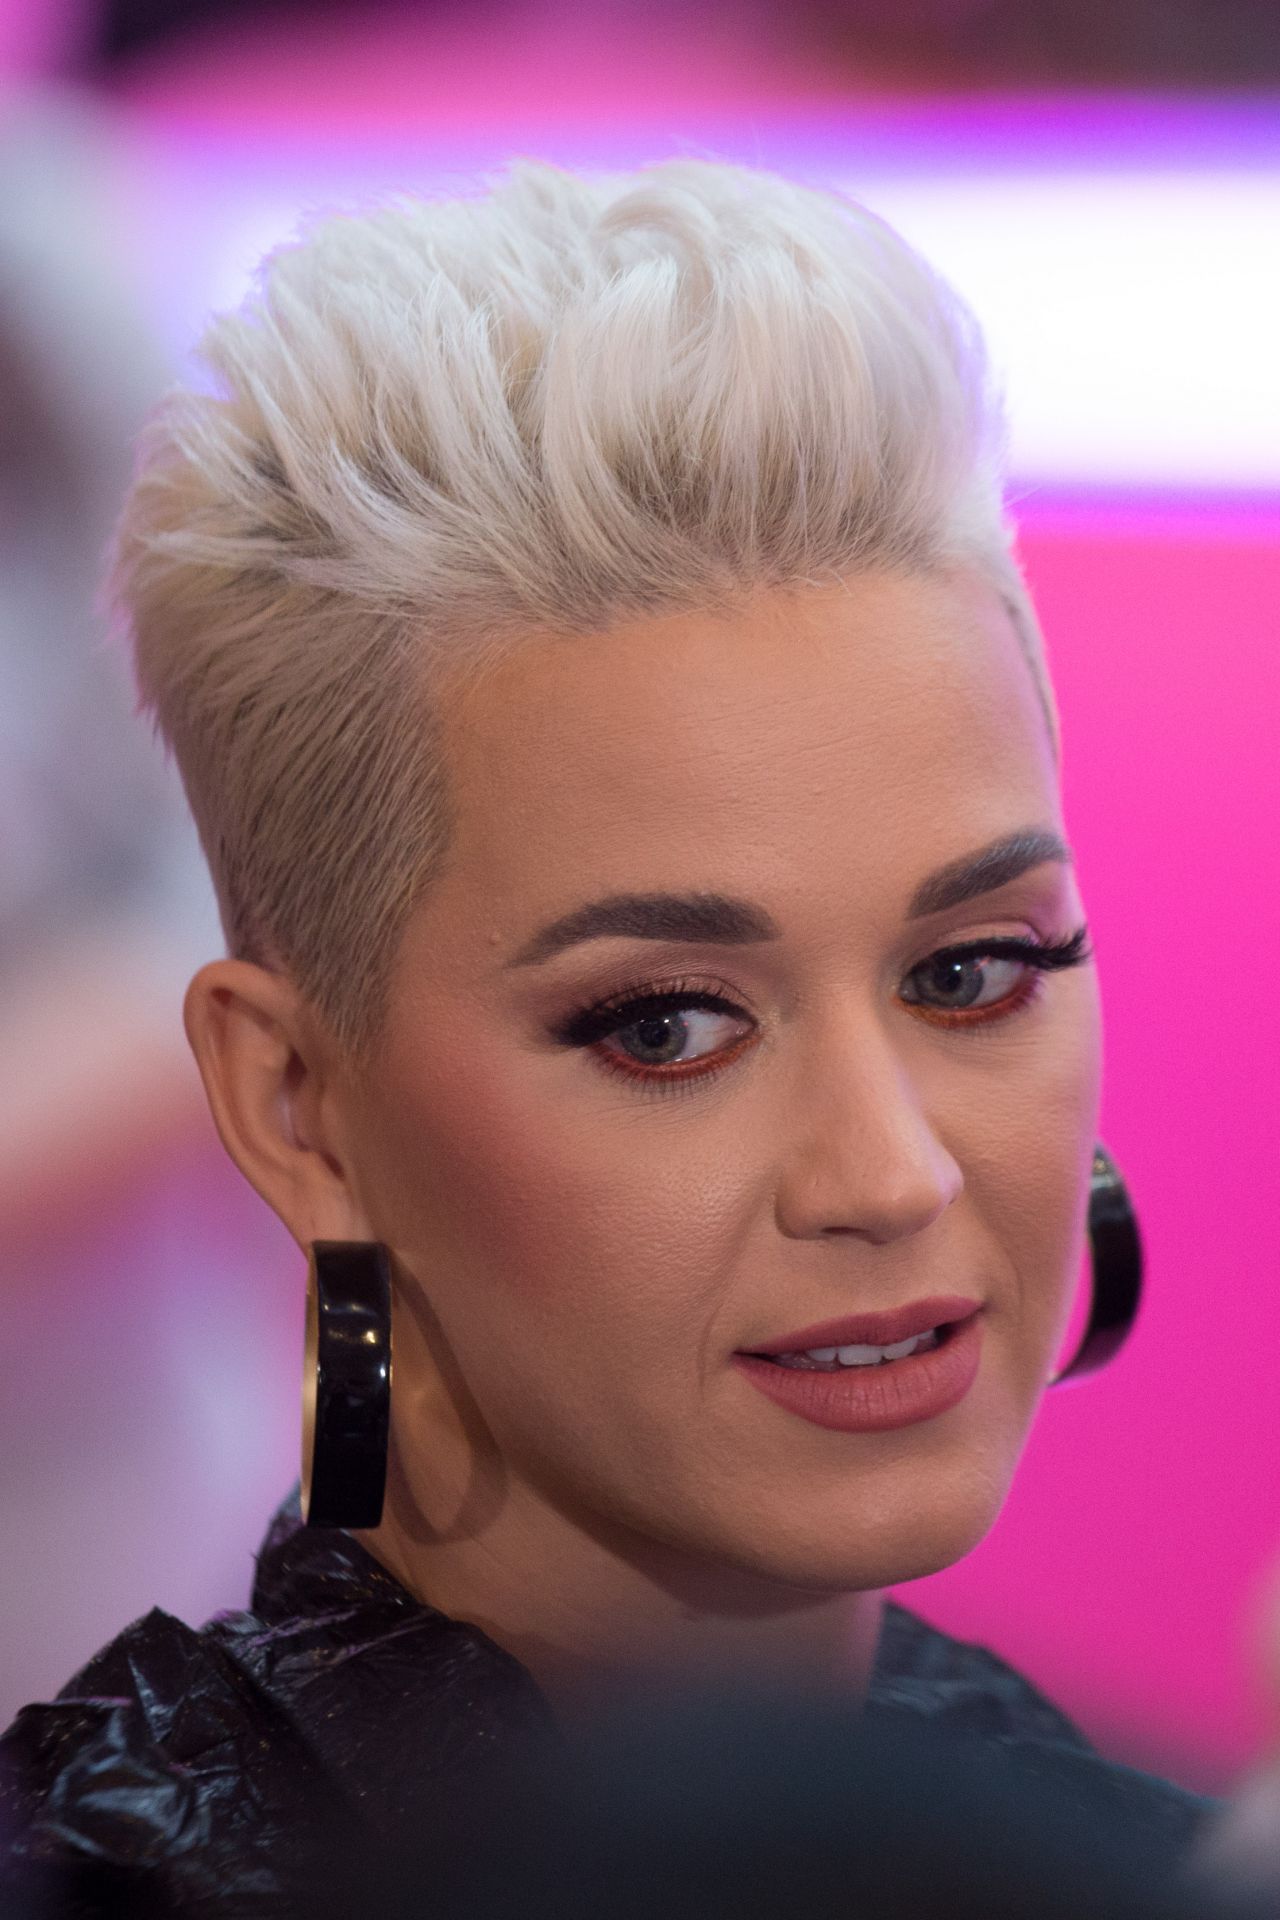 Katy Perry - Q&A at Southland Shopping Centre in Melbourne • CelebMafia